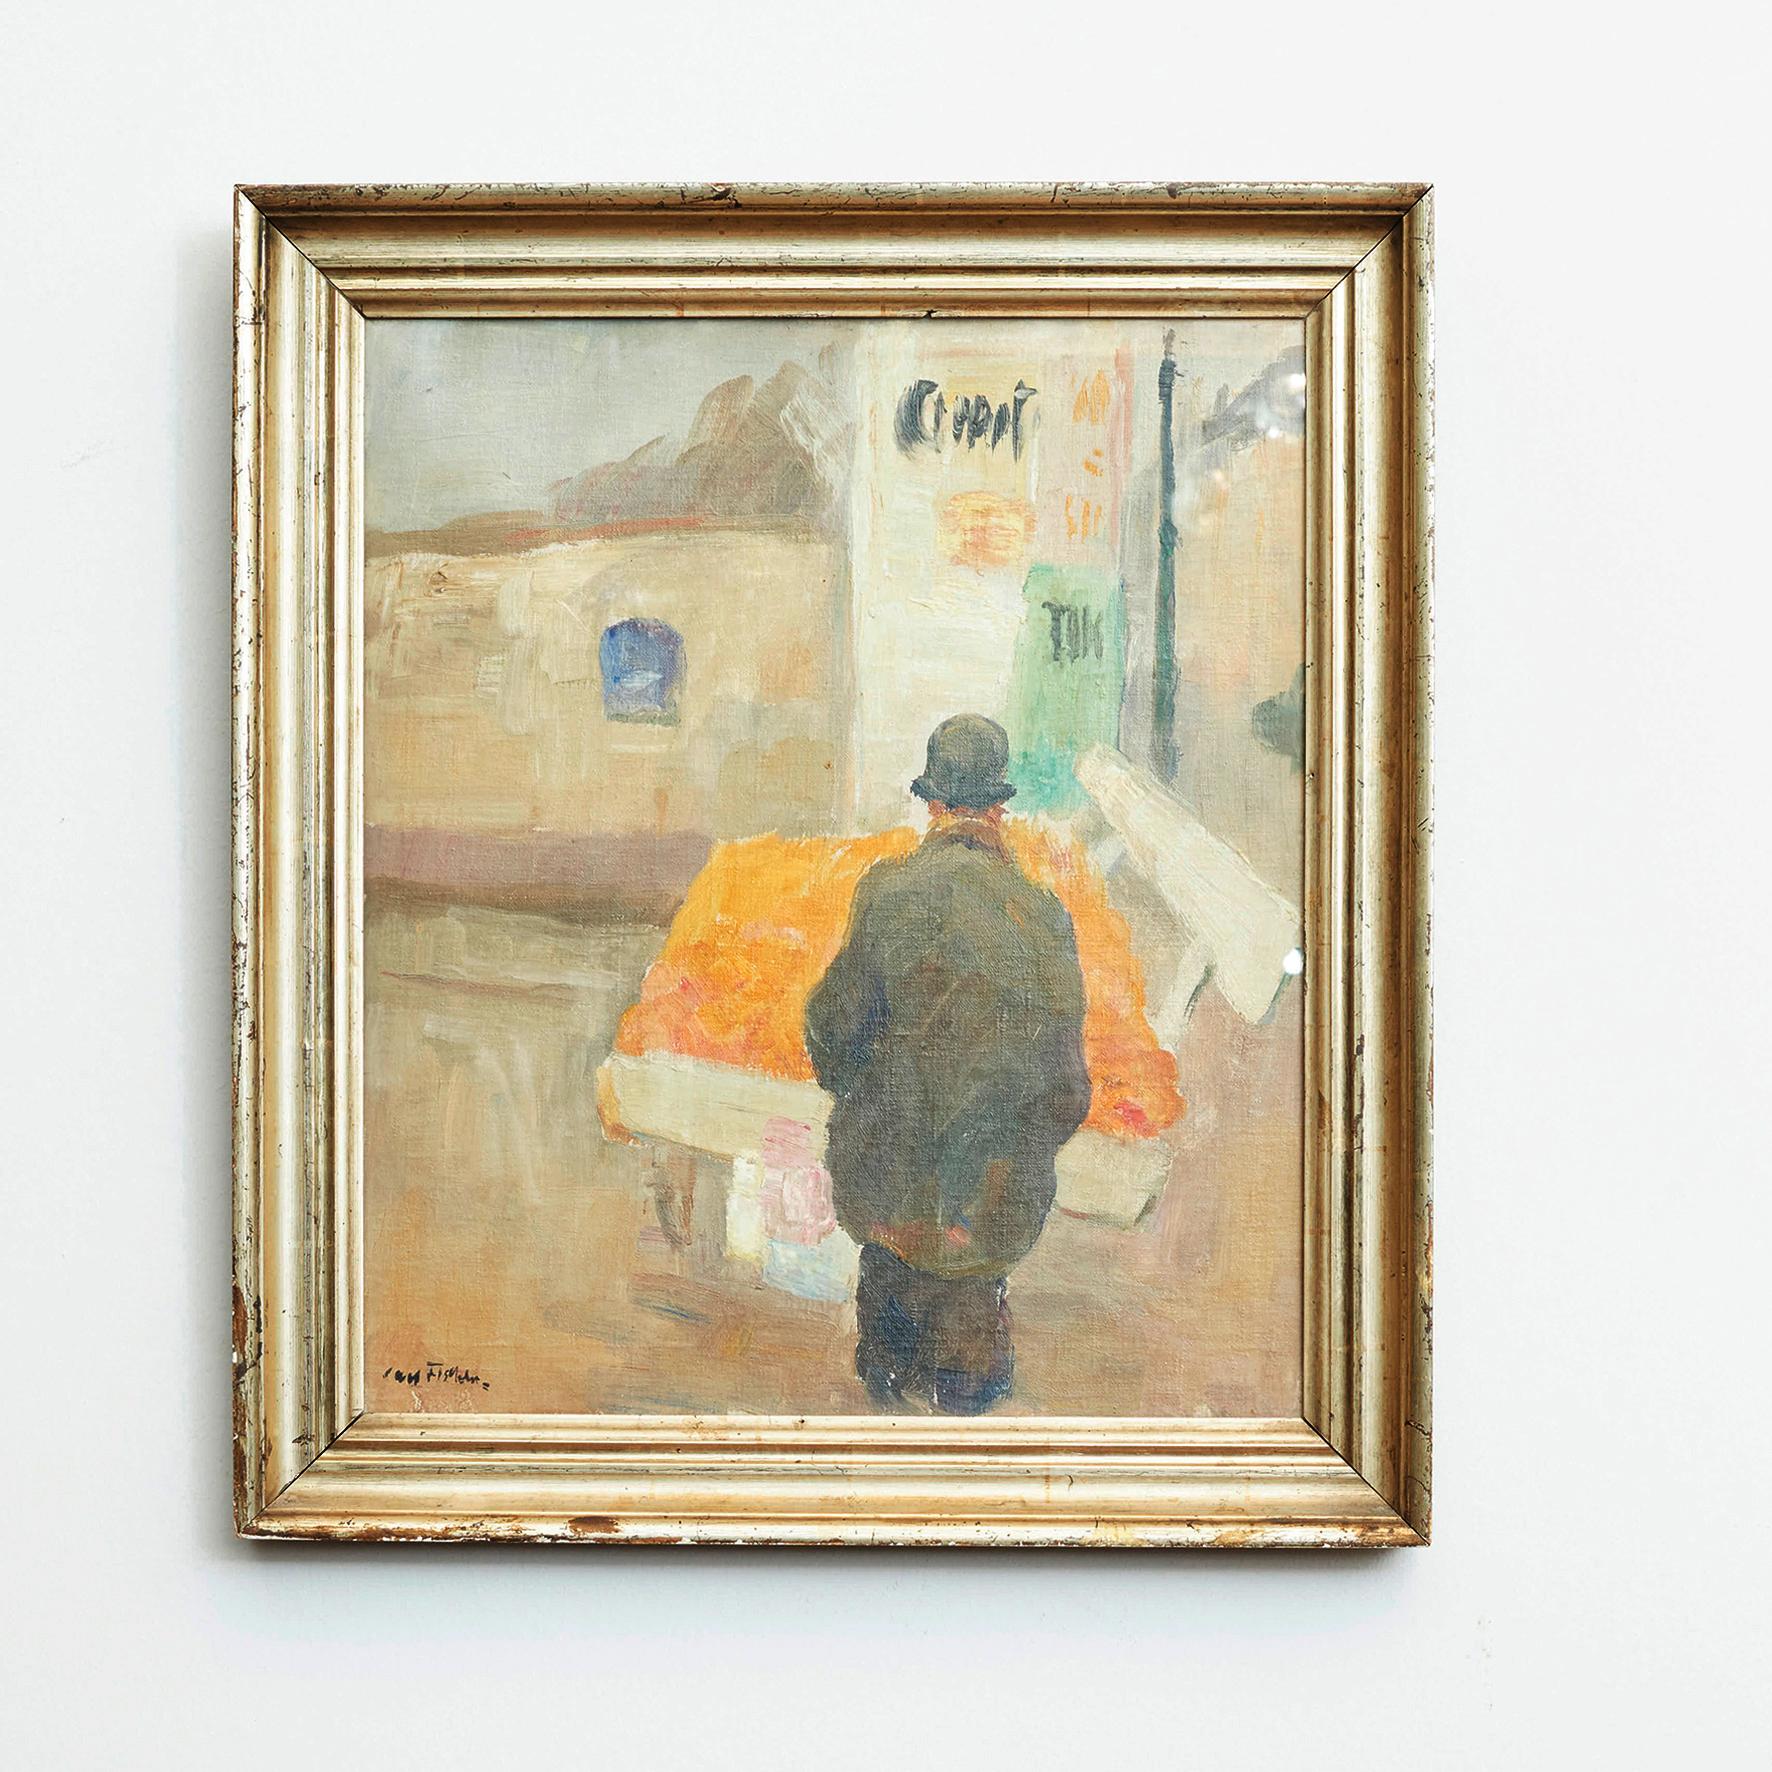 Painting by Carl Fischer (1887-1962), signed. Oil on canvas.
Motif of French village scene, a man standing next to bench, France, circa 1930.
Original silver frame. Front glass-mounted (this is removable)

Measures: Without frame:
H. 50, W. 43